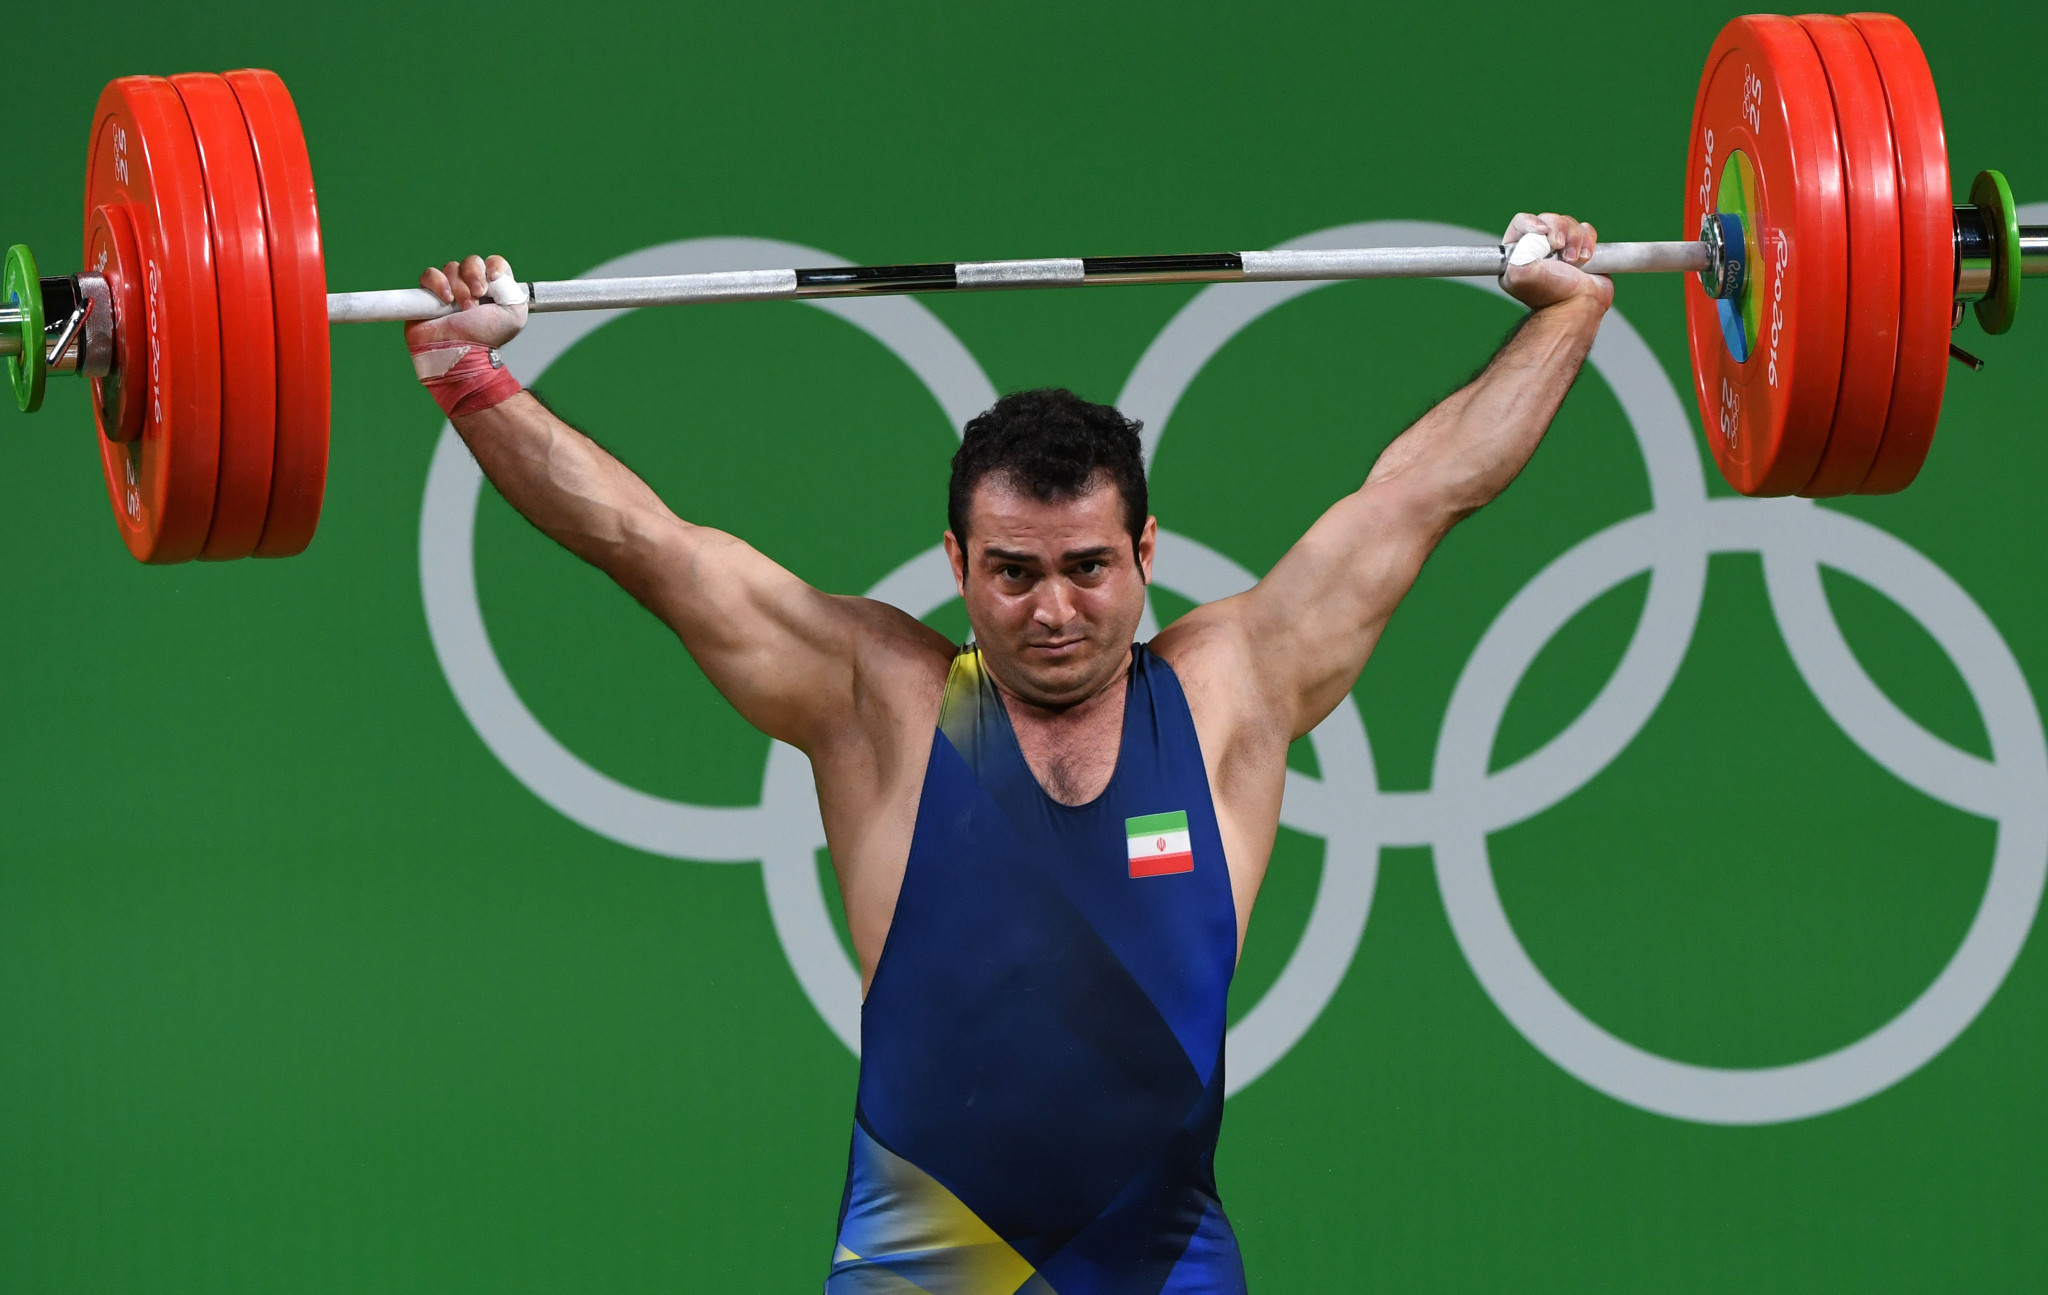 Sohrab Moradi won Olympic gold at Rio 2016 but has not qualified for Tokyo 2020 ©Getty Images